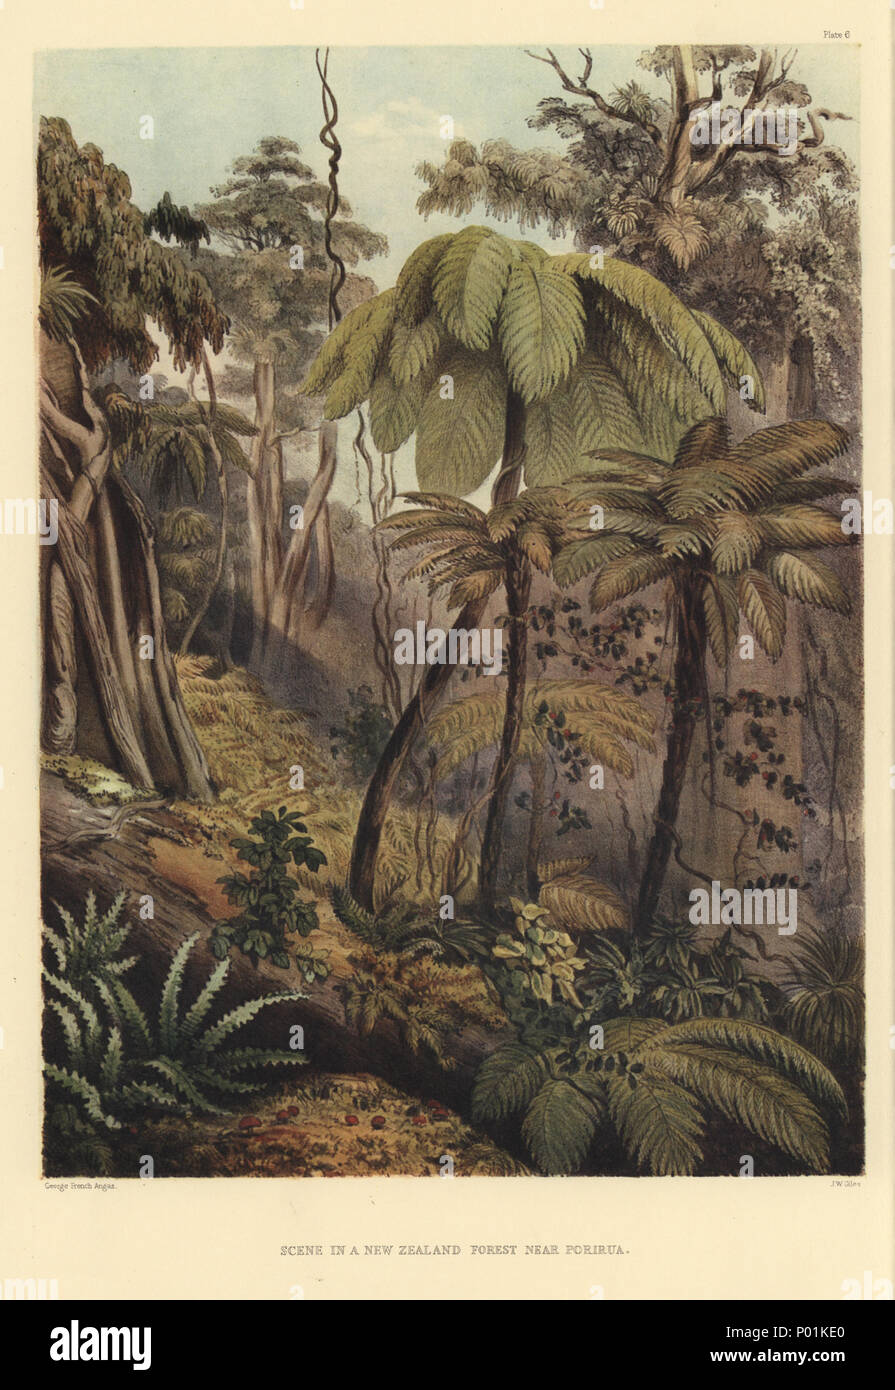 . English: SCENE IN A NEW ZEALAND FOREST NEAR PORIRUA [Image of page 23] PLATE VI. SCENE IN A NEW ZEALAND FOREST. THERE is no country in the world so rich in ferns as New Zealand--the variety and elegance of their forms from the most minute species, to the giant tribe, is astonishing-- some attain a height of forty feet, whilst others of exquisite beauty are extremely small. Two examples of the tree-ferns are figured in the accompanying scene--the Cyathea medullaris, and the Cyathea dealbata; the pulp of the former, at certain seasons of the year, is used as food by the natives, and when boile Stock Photo